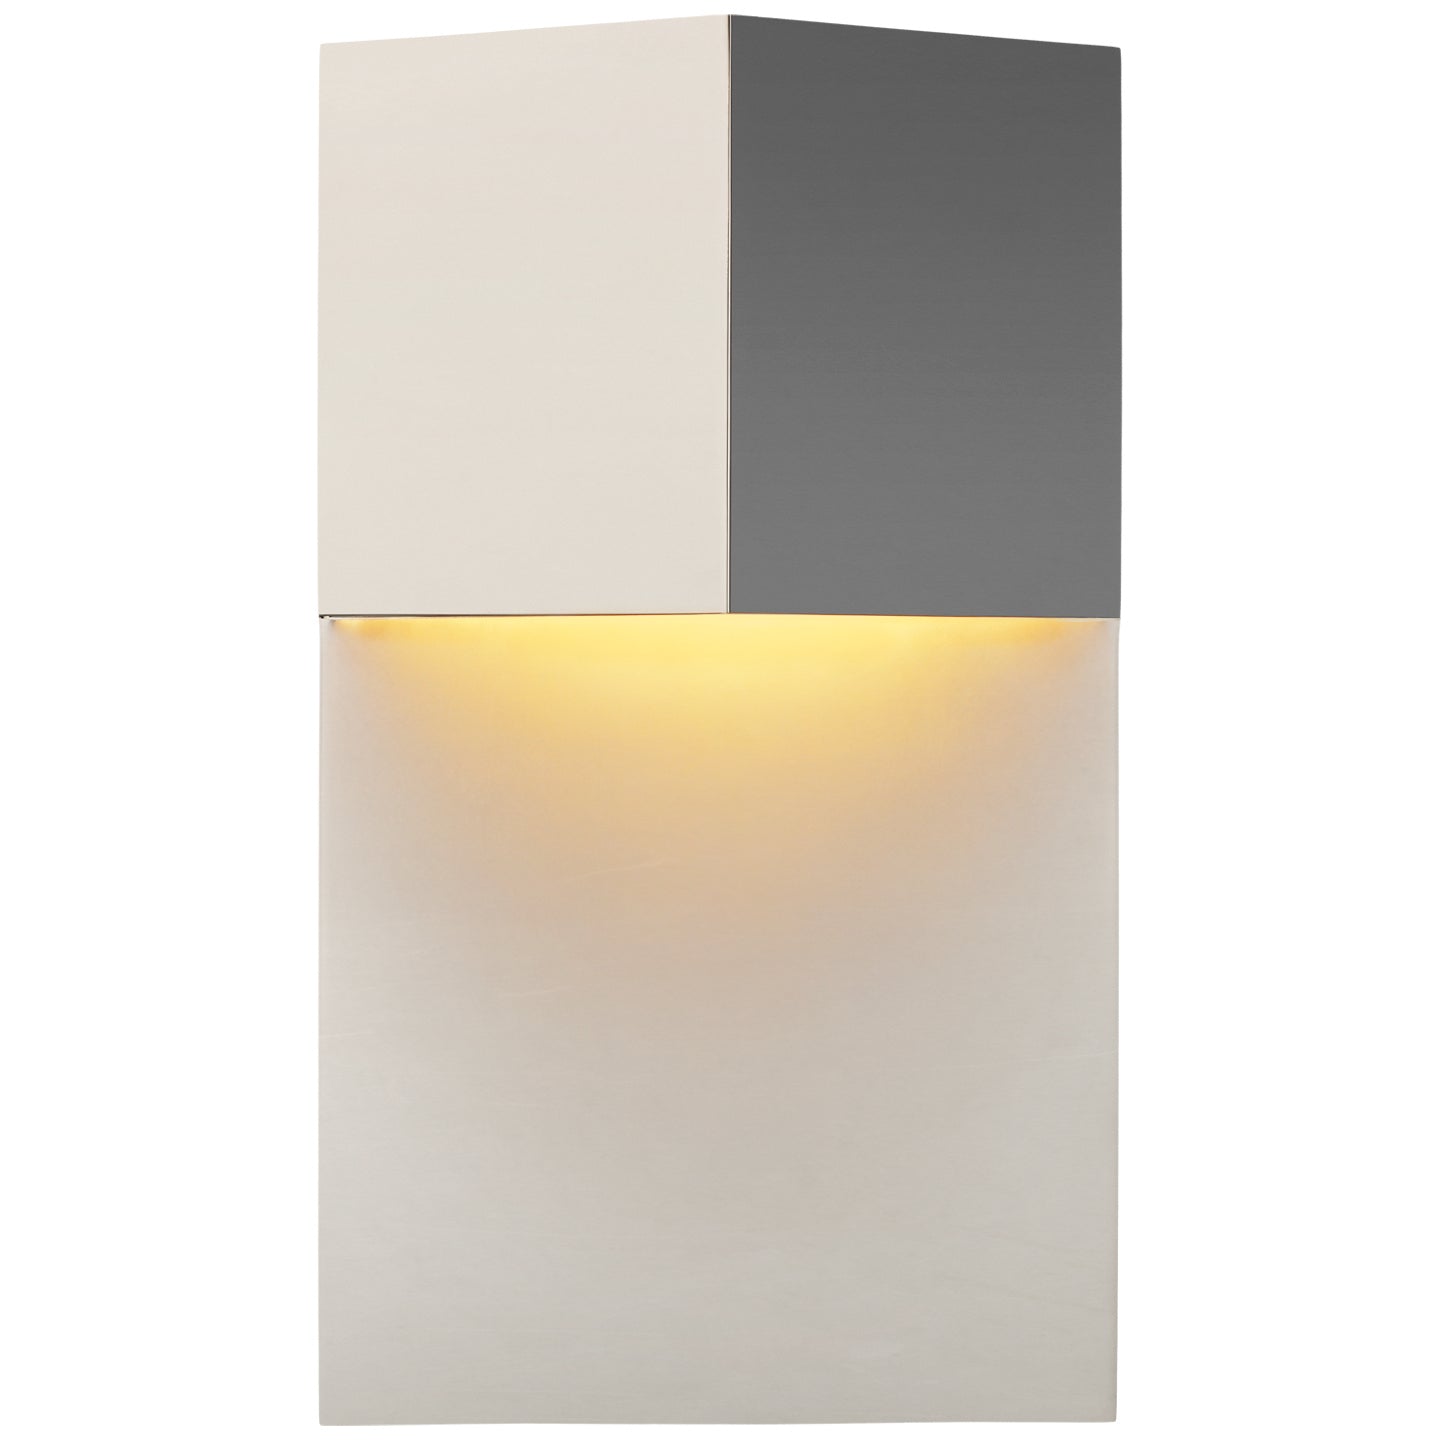 Load image into Gallery viewer, Visual Comfort Signature - KW 2781PN - LED Outdoor Wall Sconce - Rega - Polished Nickel
